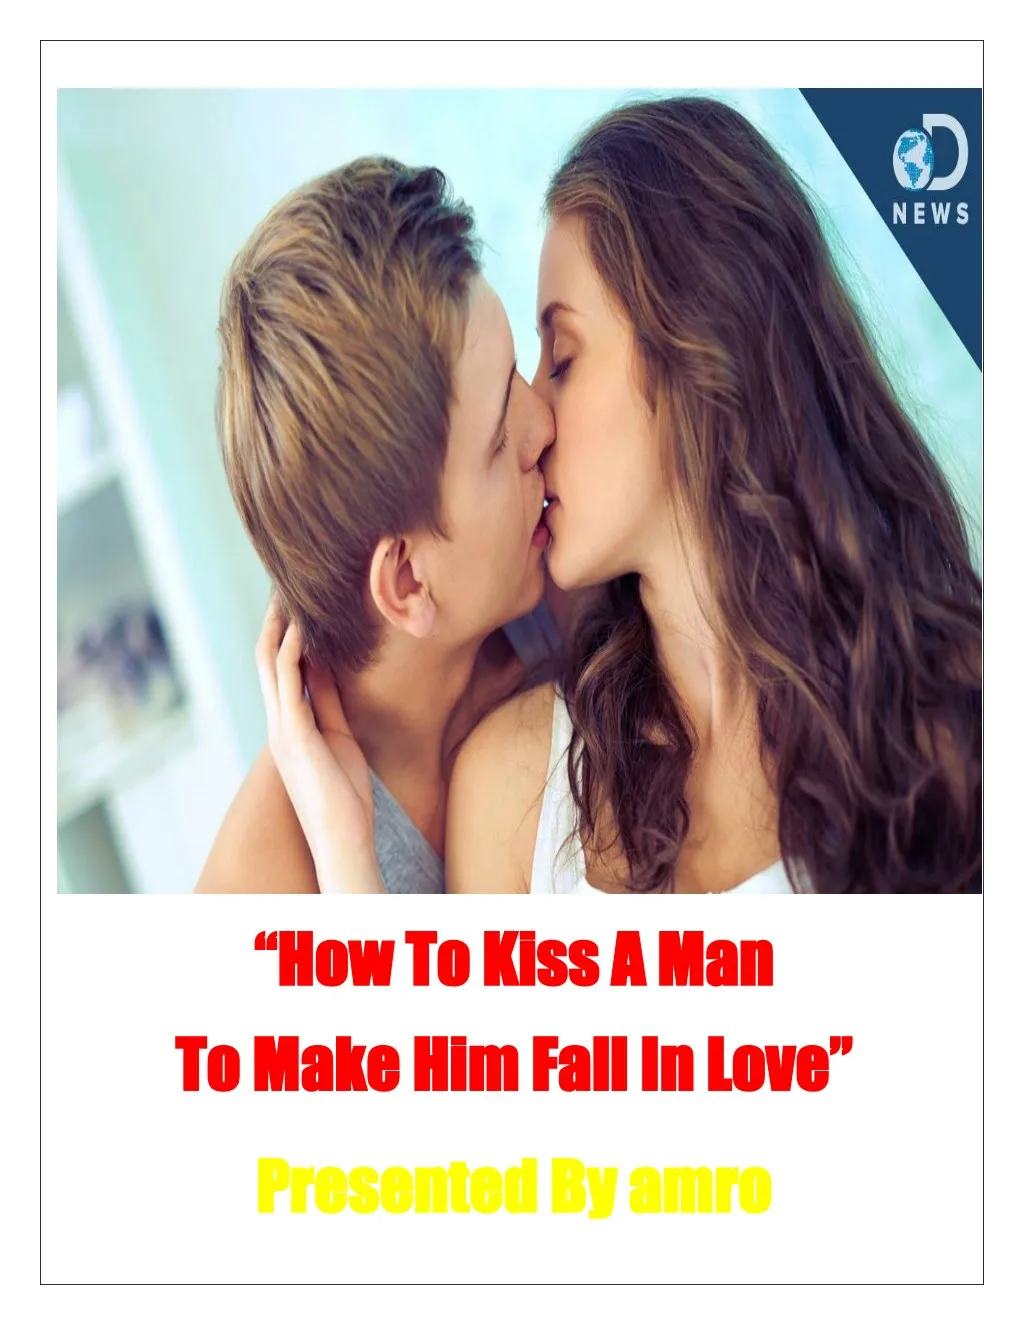 how to kiss a man how to kiss a man to make